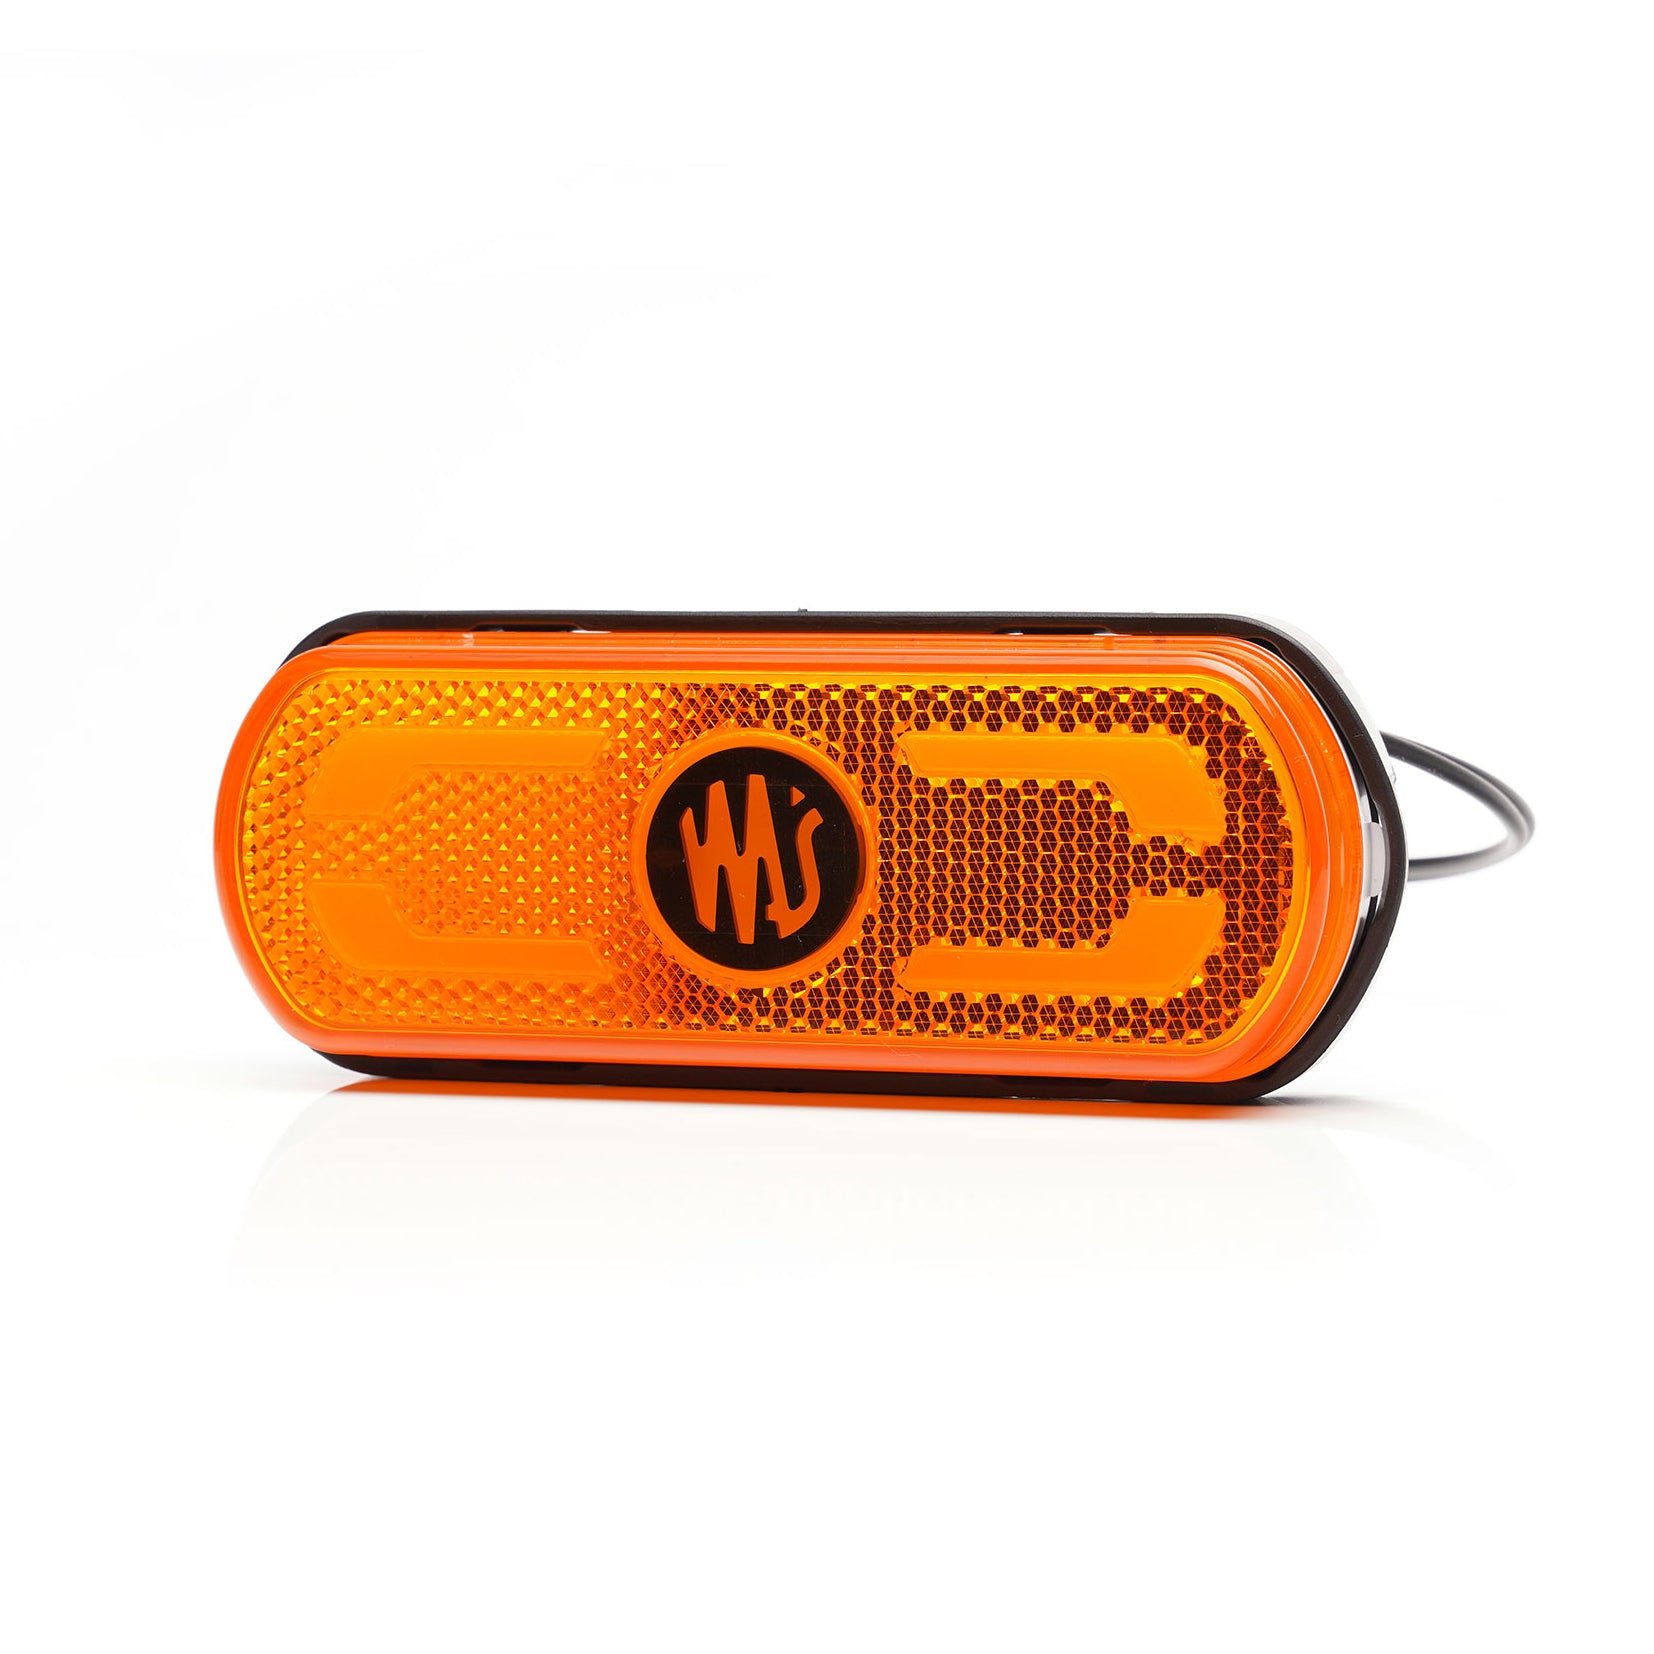 WAS W240 Amber Marker Light with Vehicle Outline Light - spo-cs-disabled - spo-default - spo-enabled - spo-notify-me-di